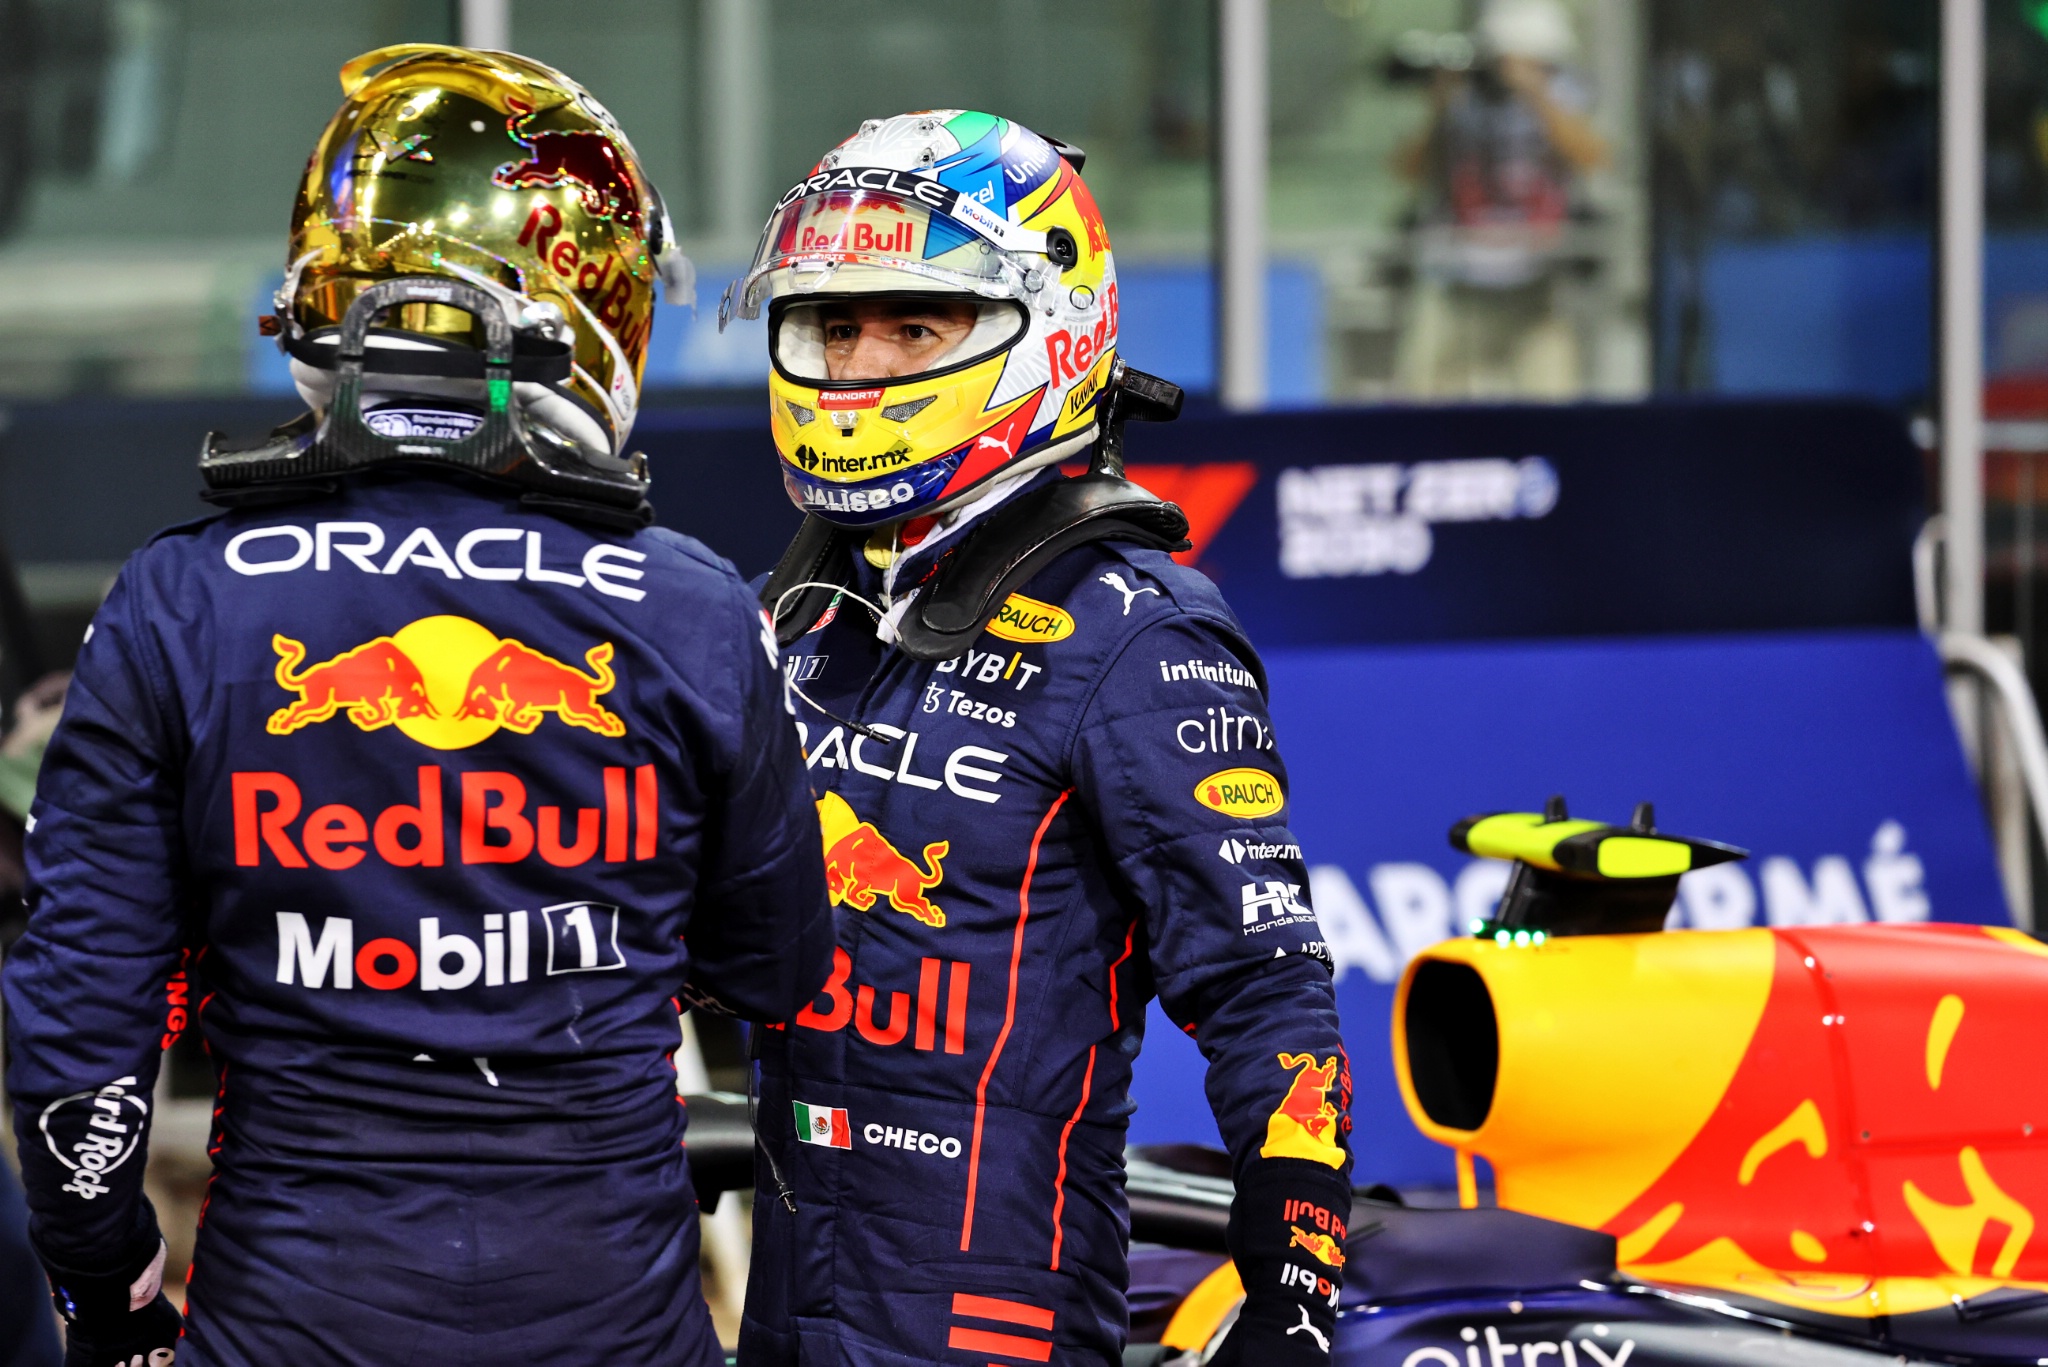 Sergio Perez (MEX) Red Bull Racing (Right) in qualifying parc ferme with team mate Max Verstappen (NLD) Red Bull Racing.